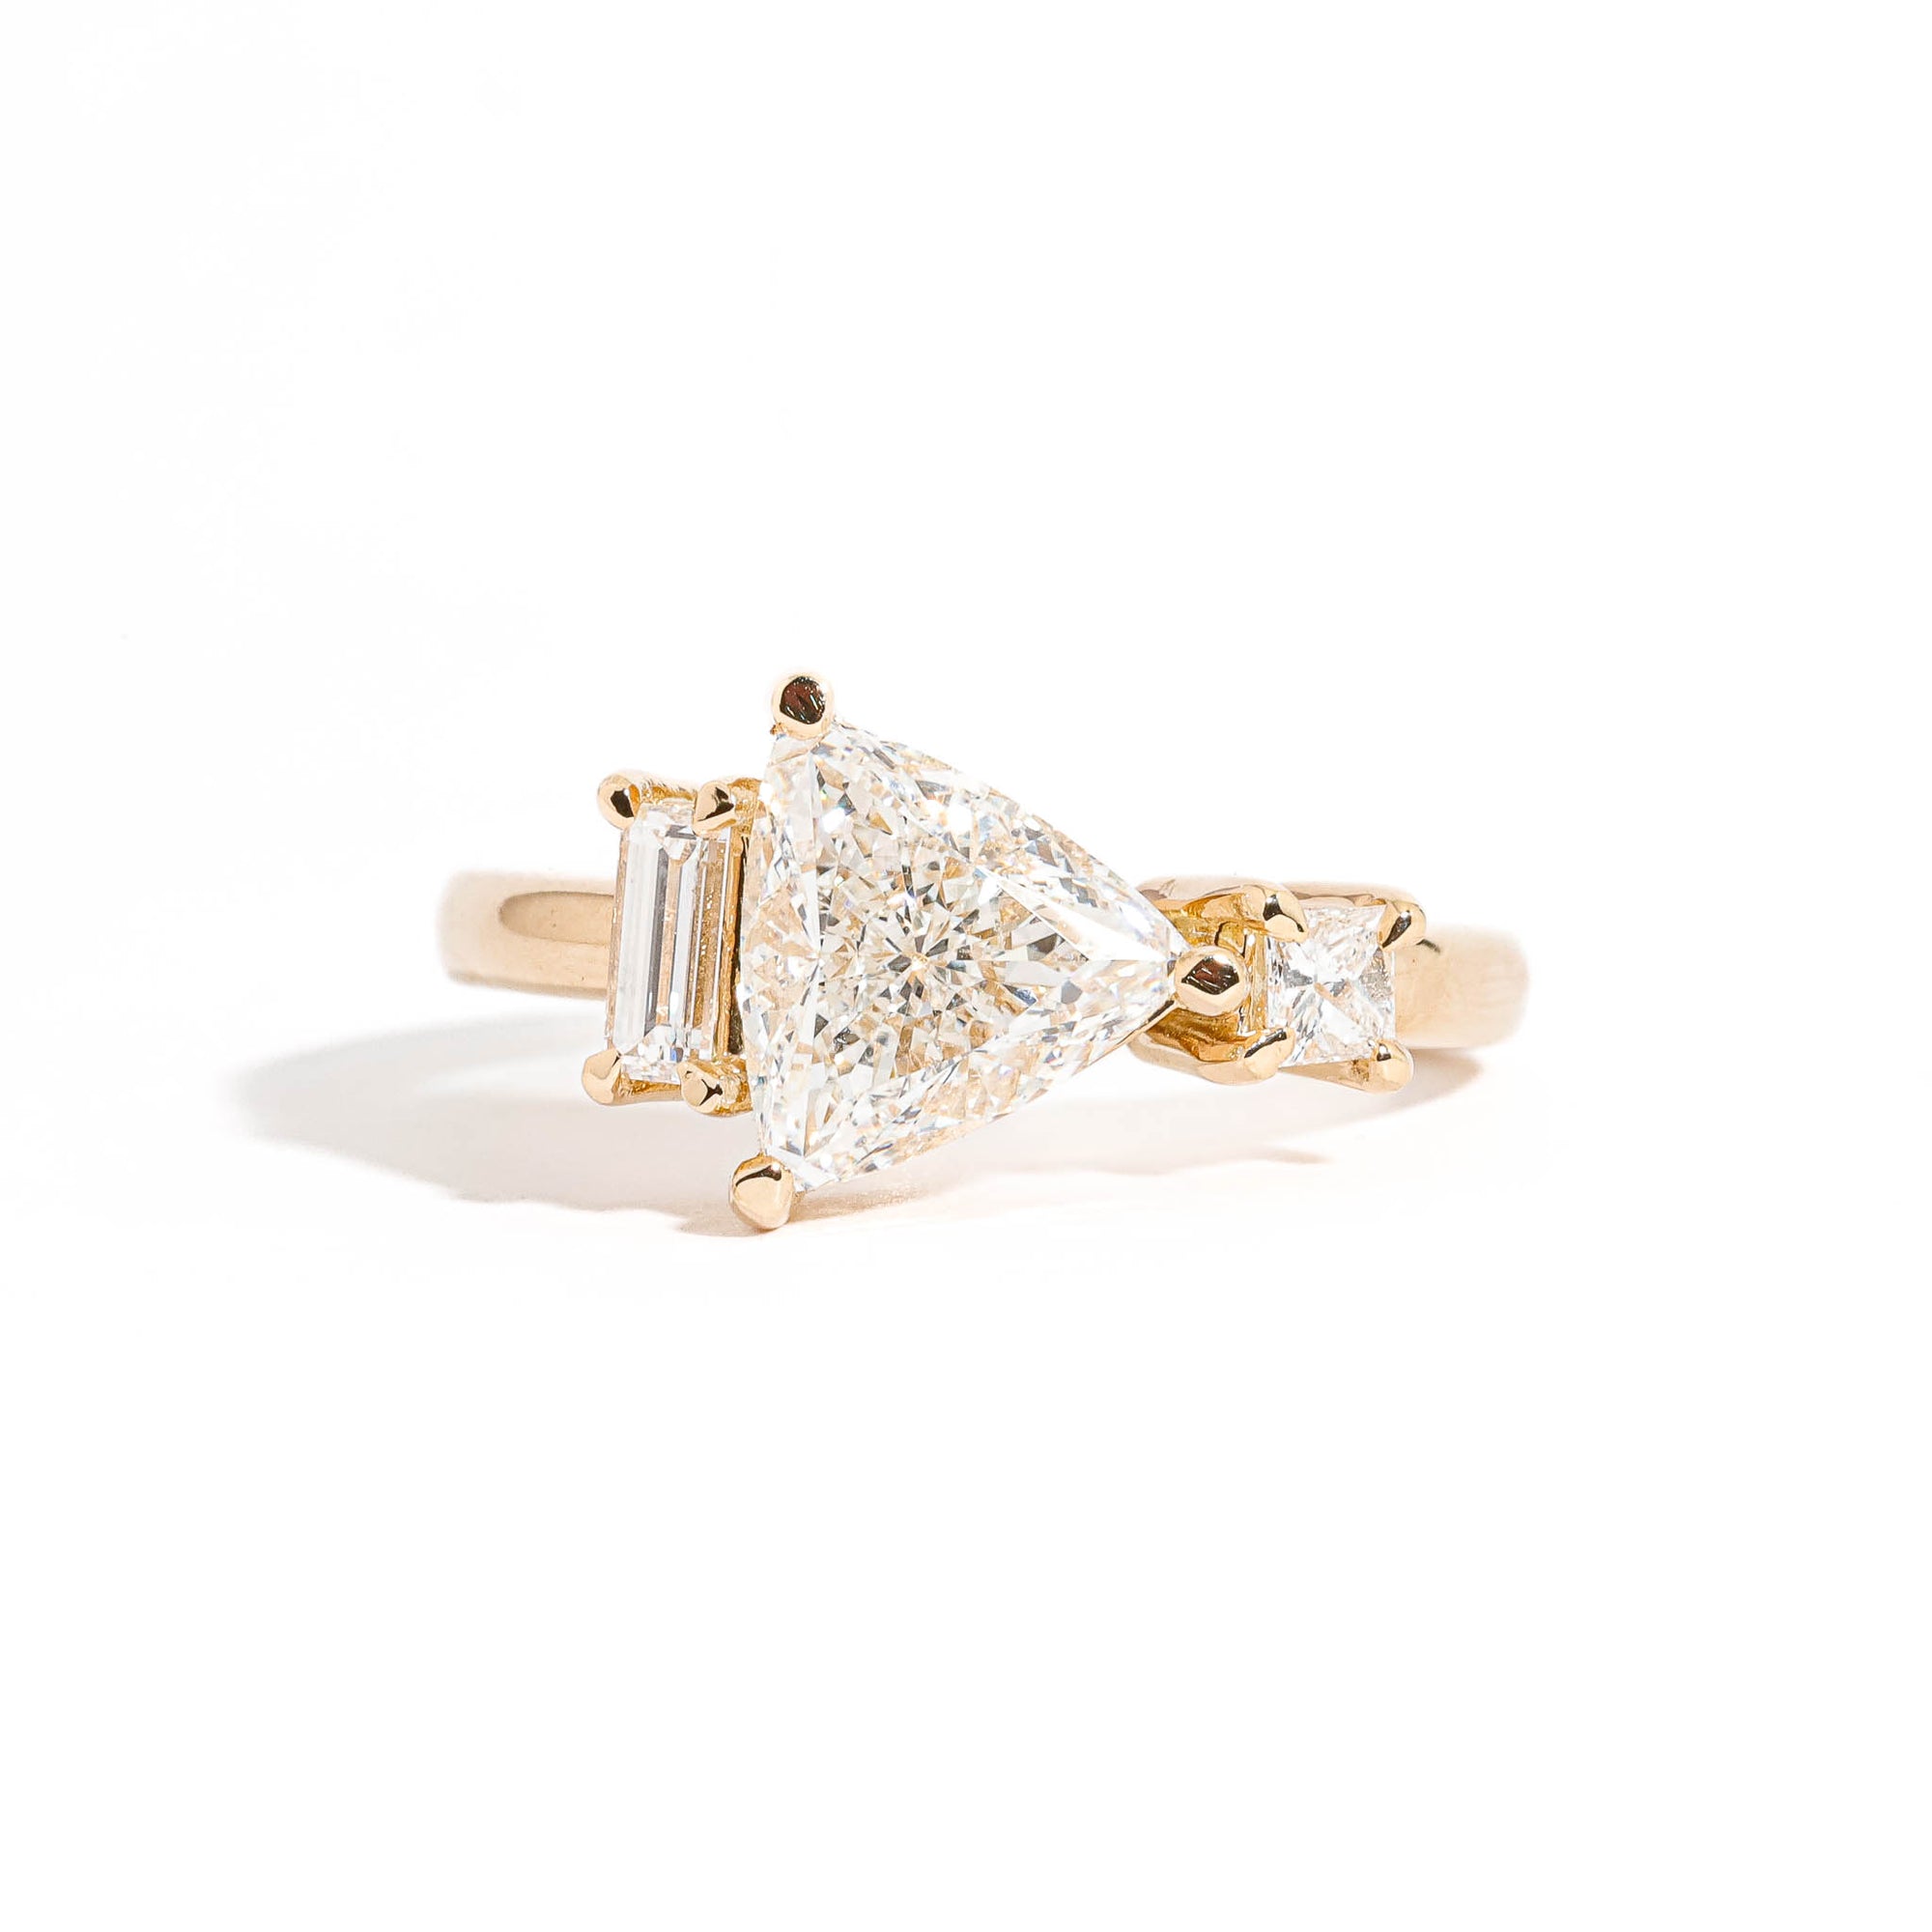 Trillion Cut Diamond Ring with Baguette and Princess Cut Diamond Side Stones in 18 Carat Yellow Gold